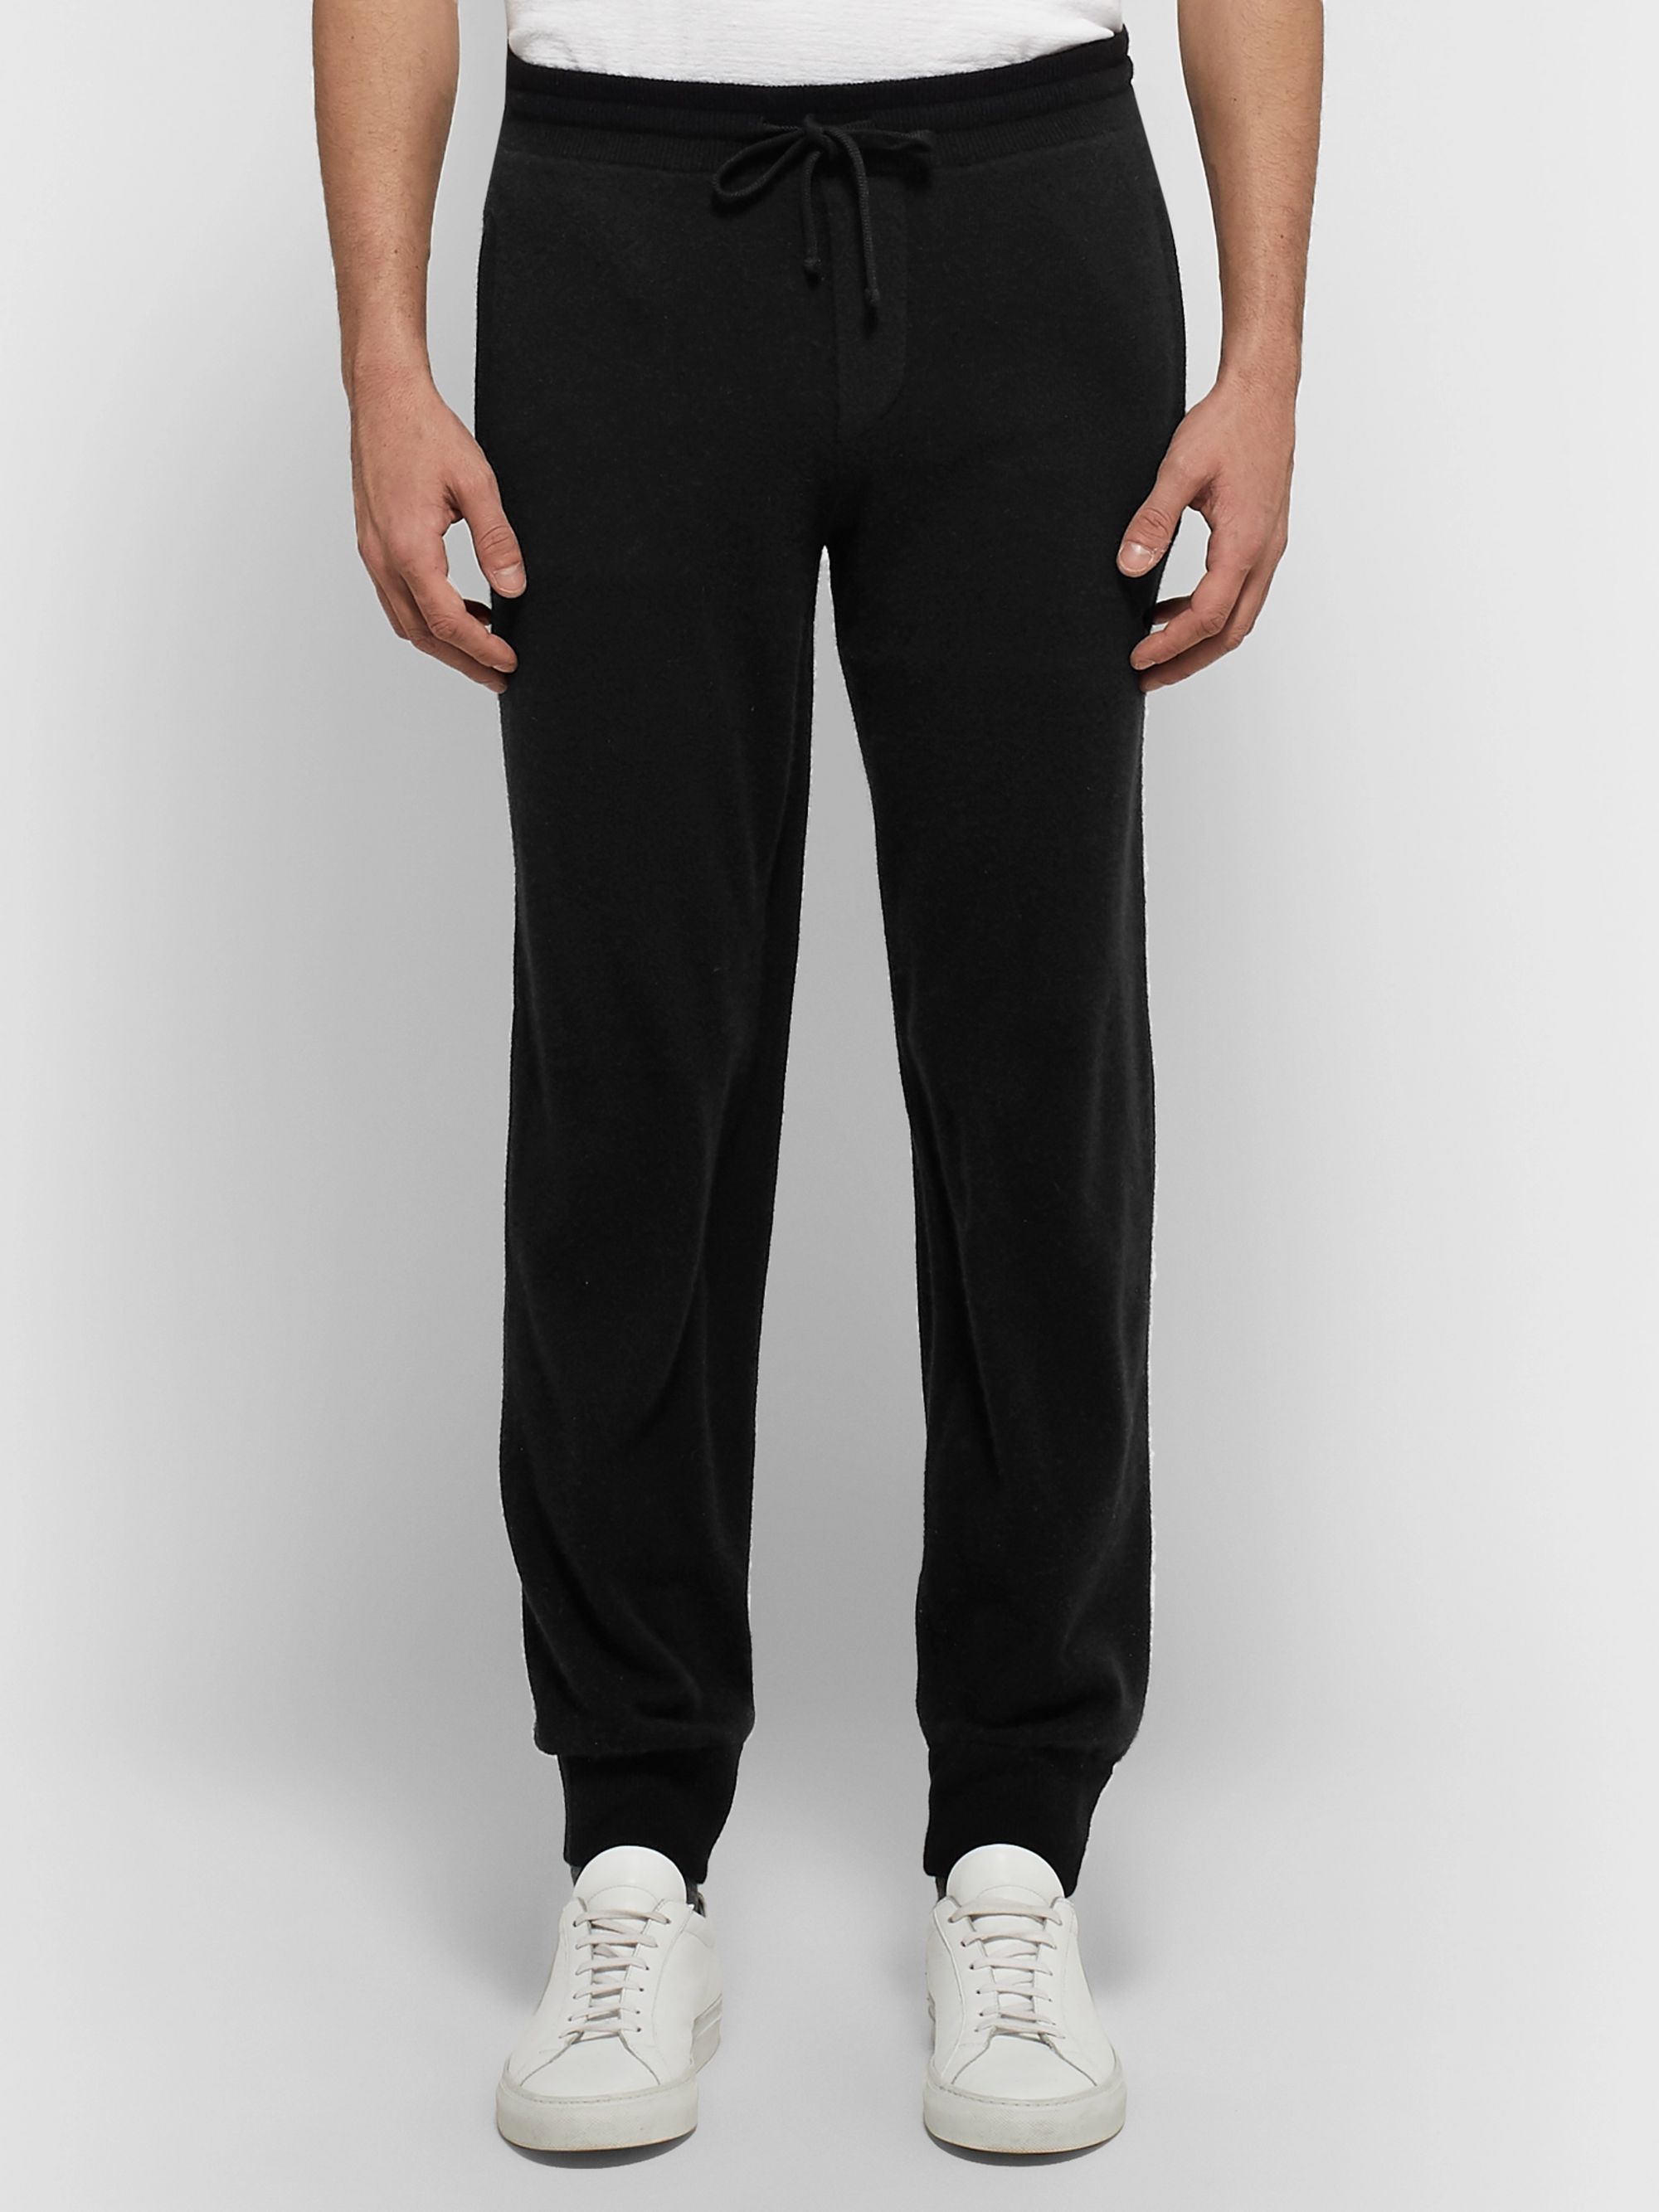 Black Tapered Baby Cashmere Sweatpants | James Perse | MR PORTER